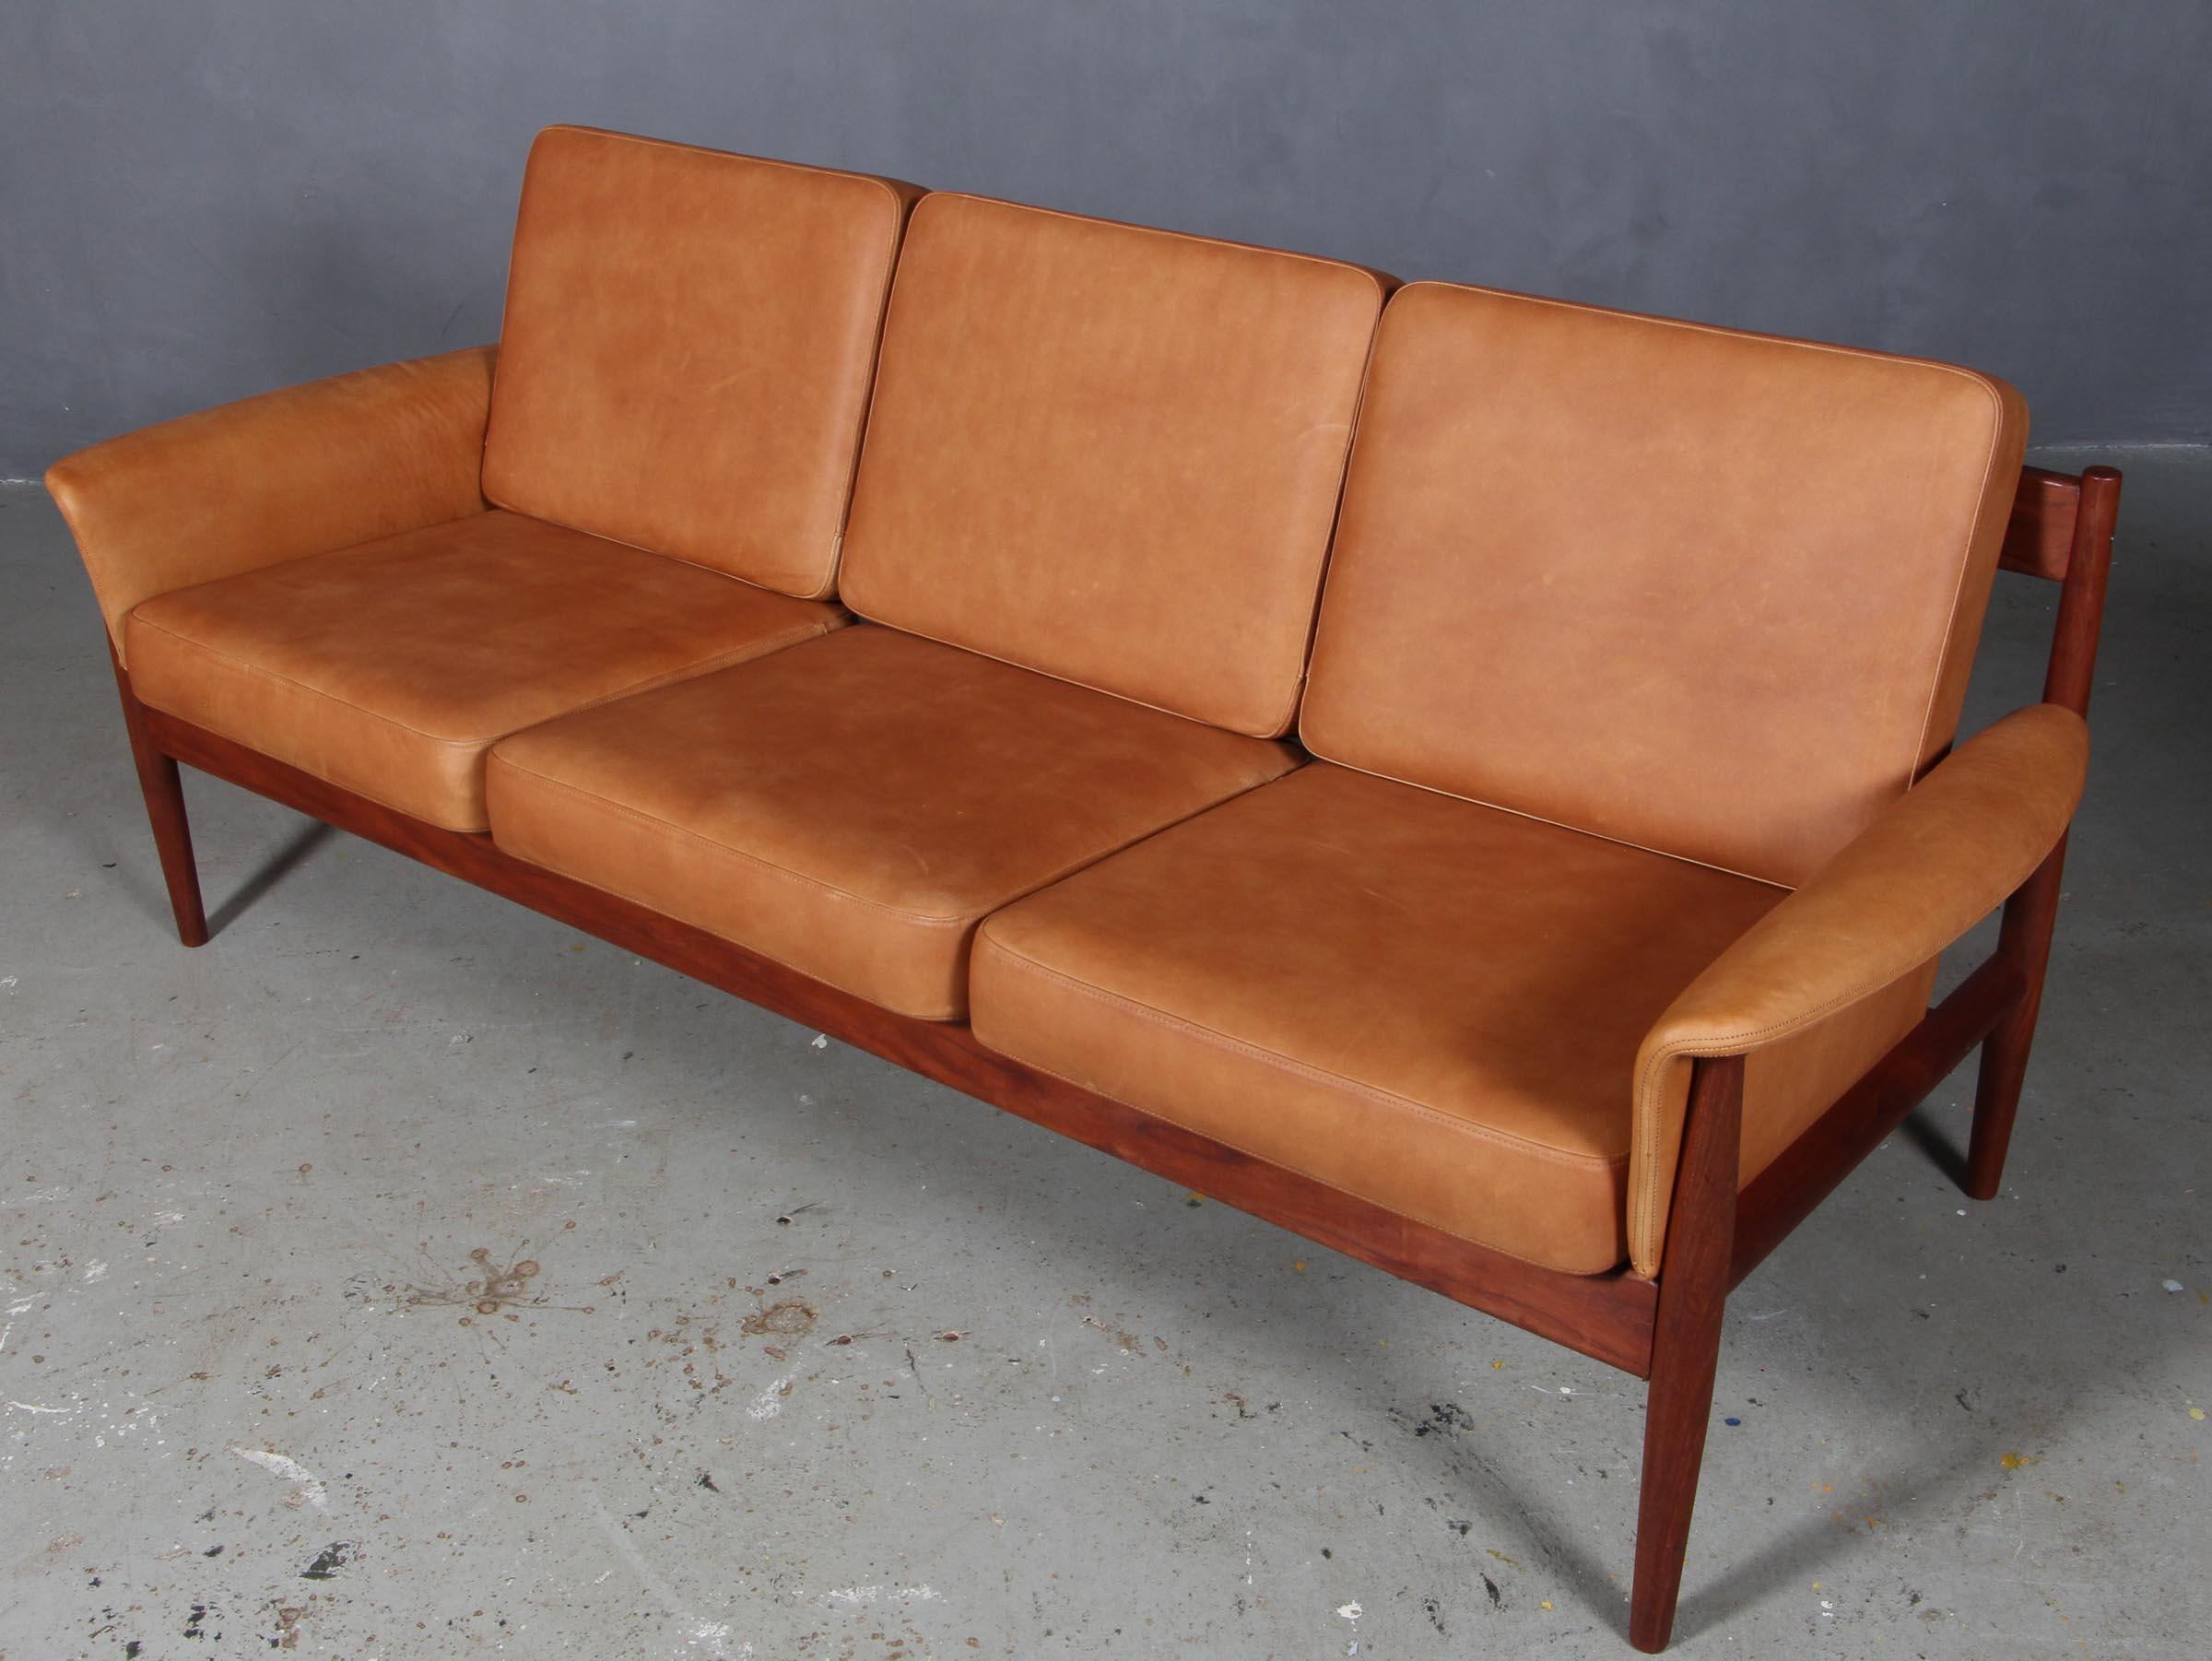 Grete Jalk three seat sofa.

New upholstered cushions with tan aniline leather.

Made by France & Daverkosen.